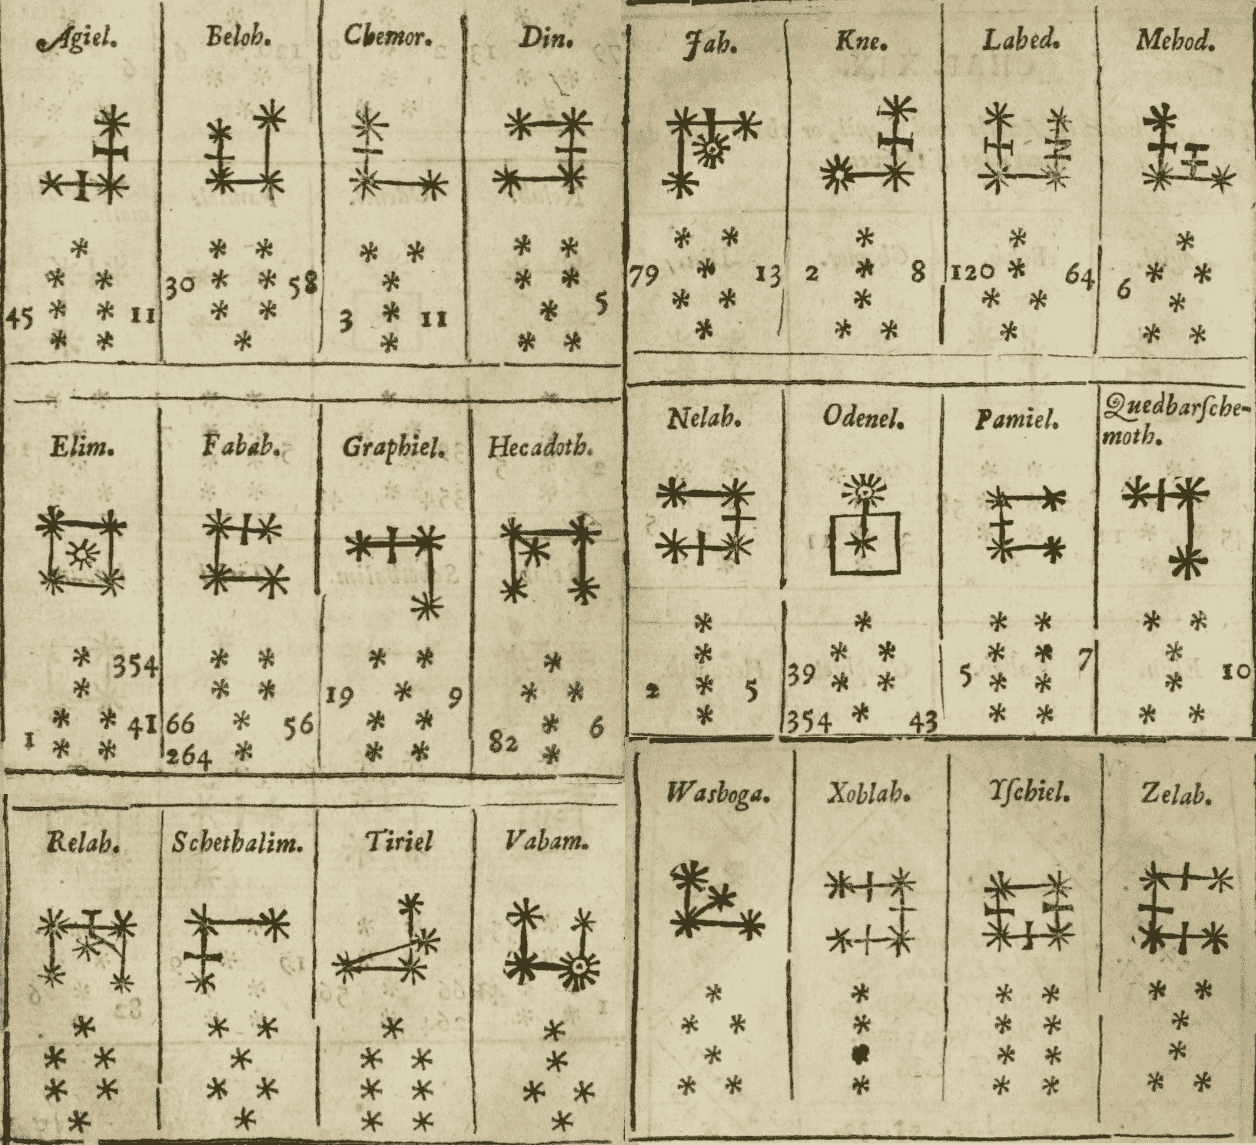 The Alphabet of the Angels and Genii as printed in Theomagia